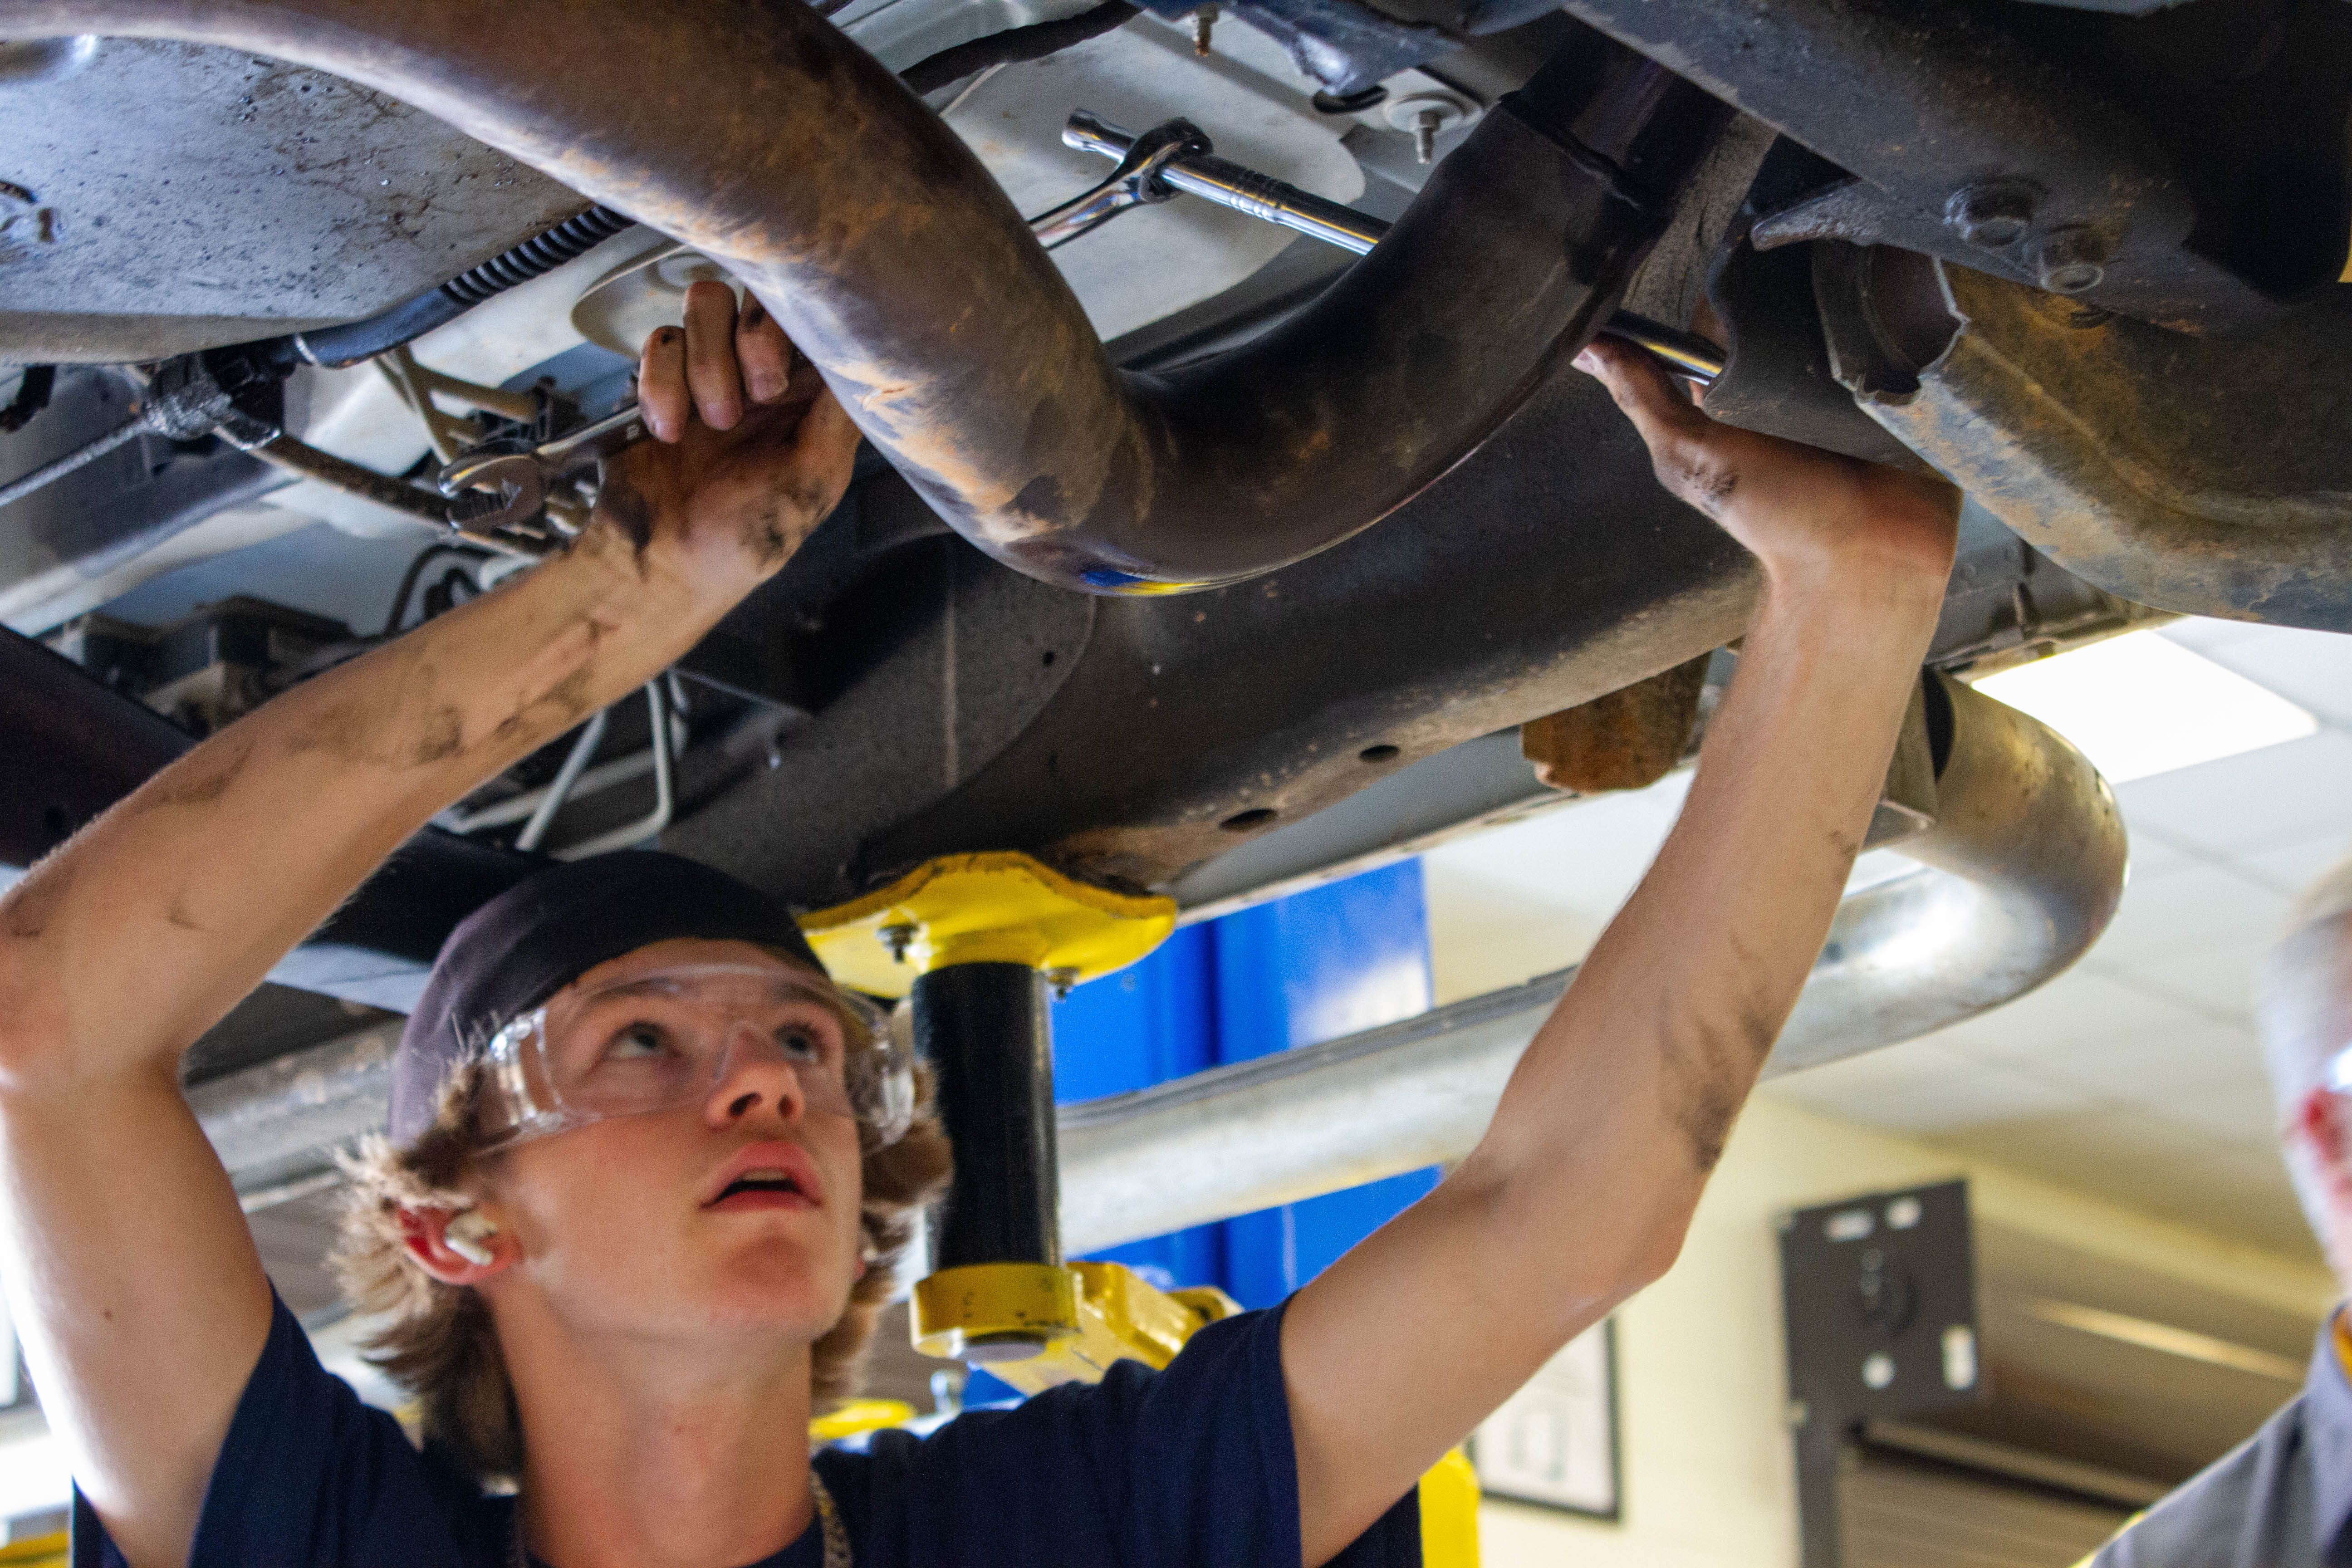 Students in Automotive Tech get hands on repair experience